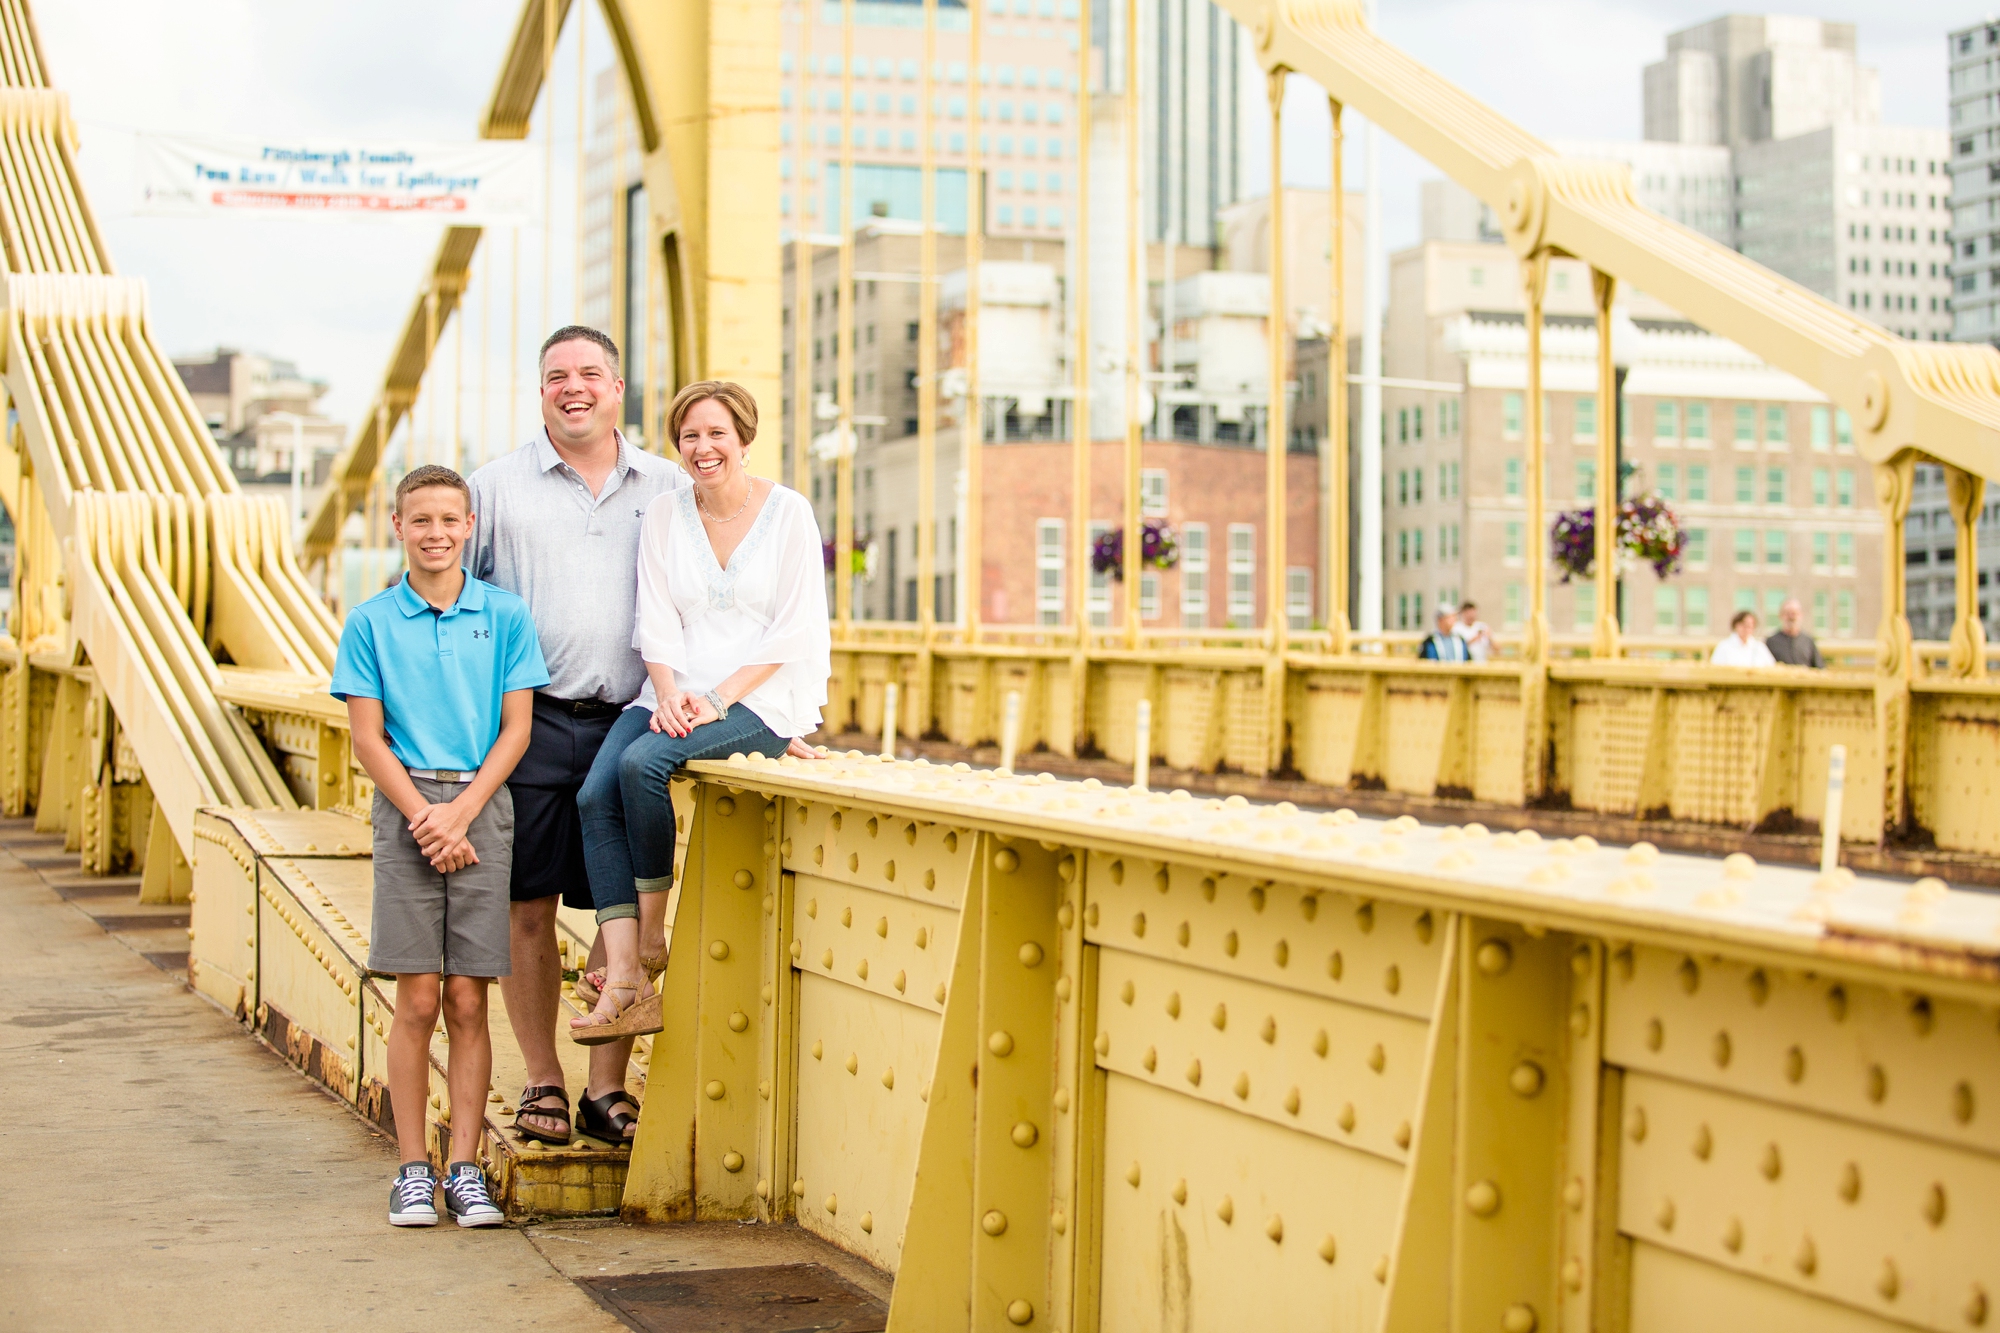 pittsburgh family photographer, cranberry township family photographer, wexford family photographer, north shore family photos